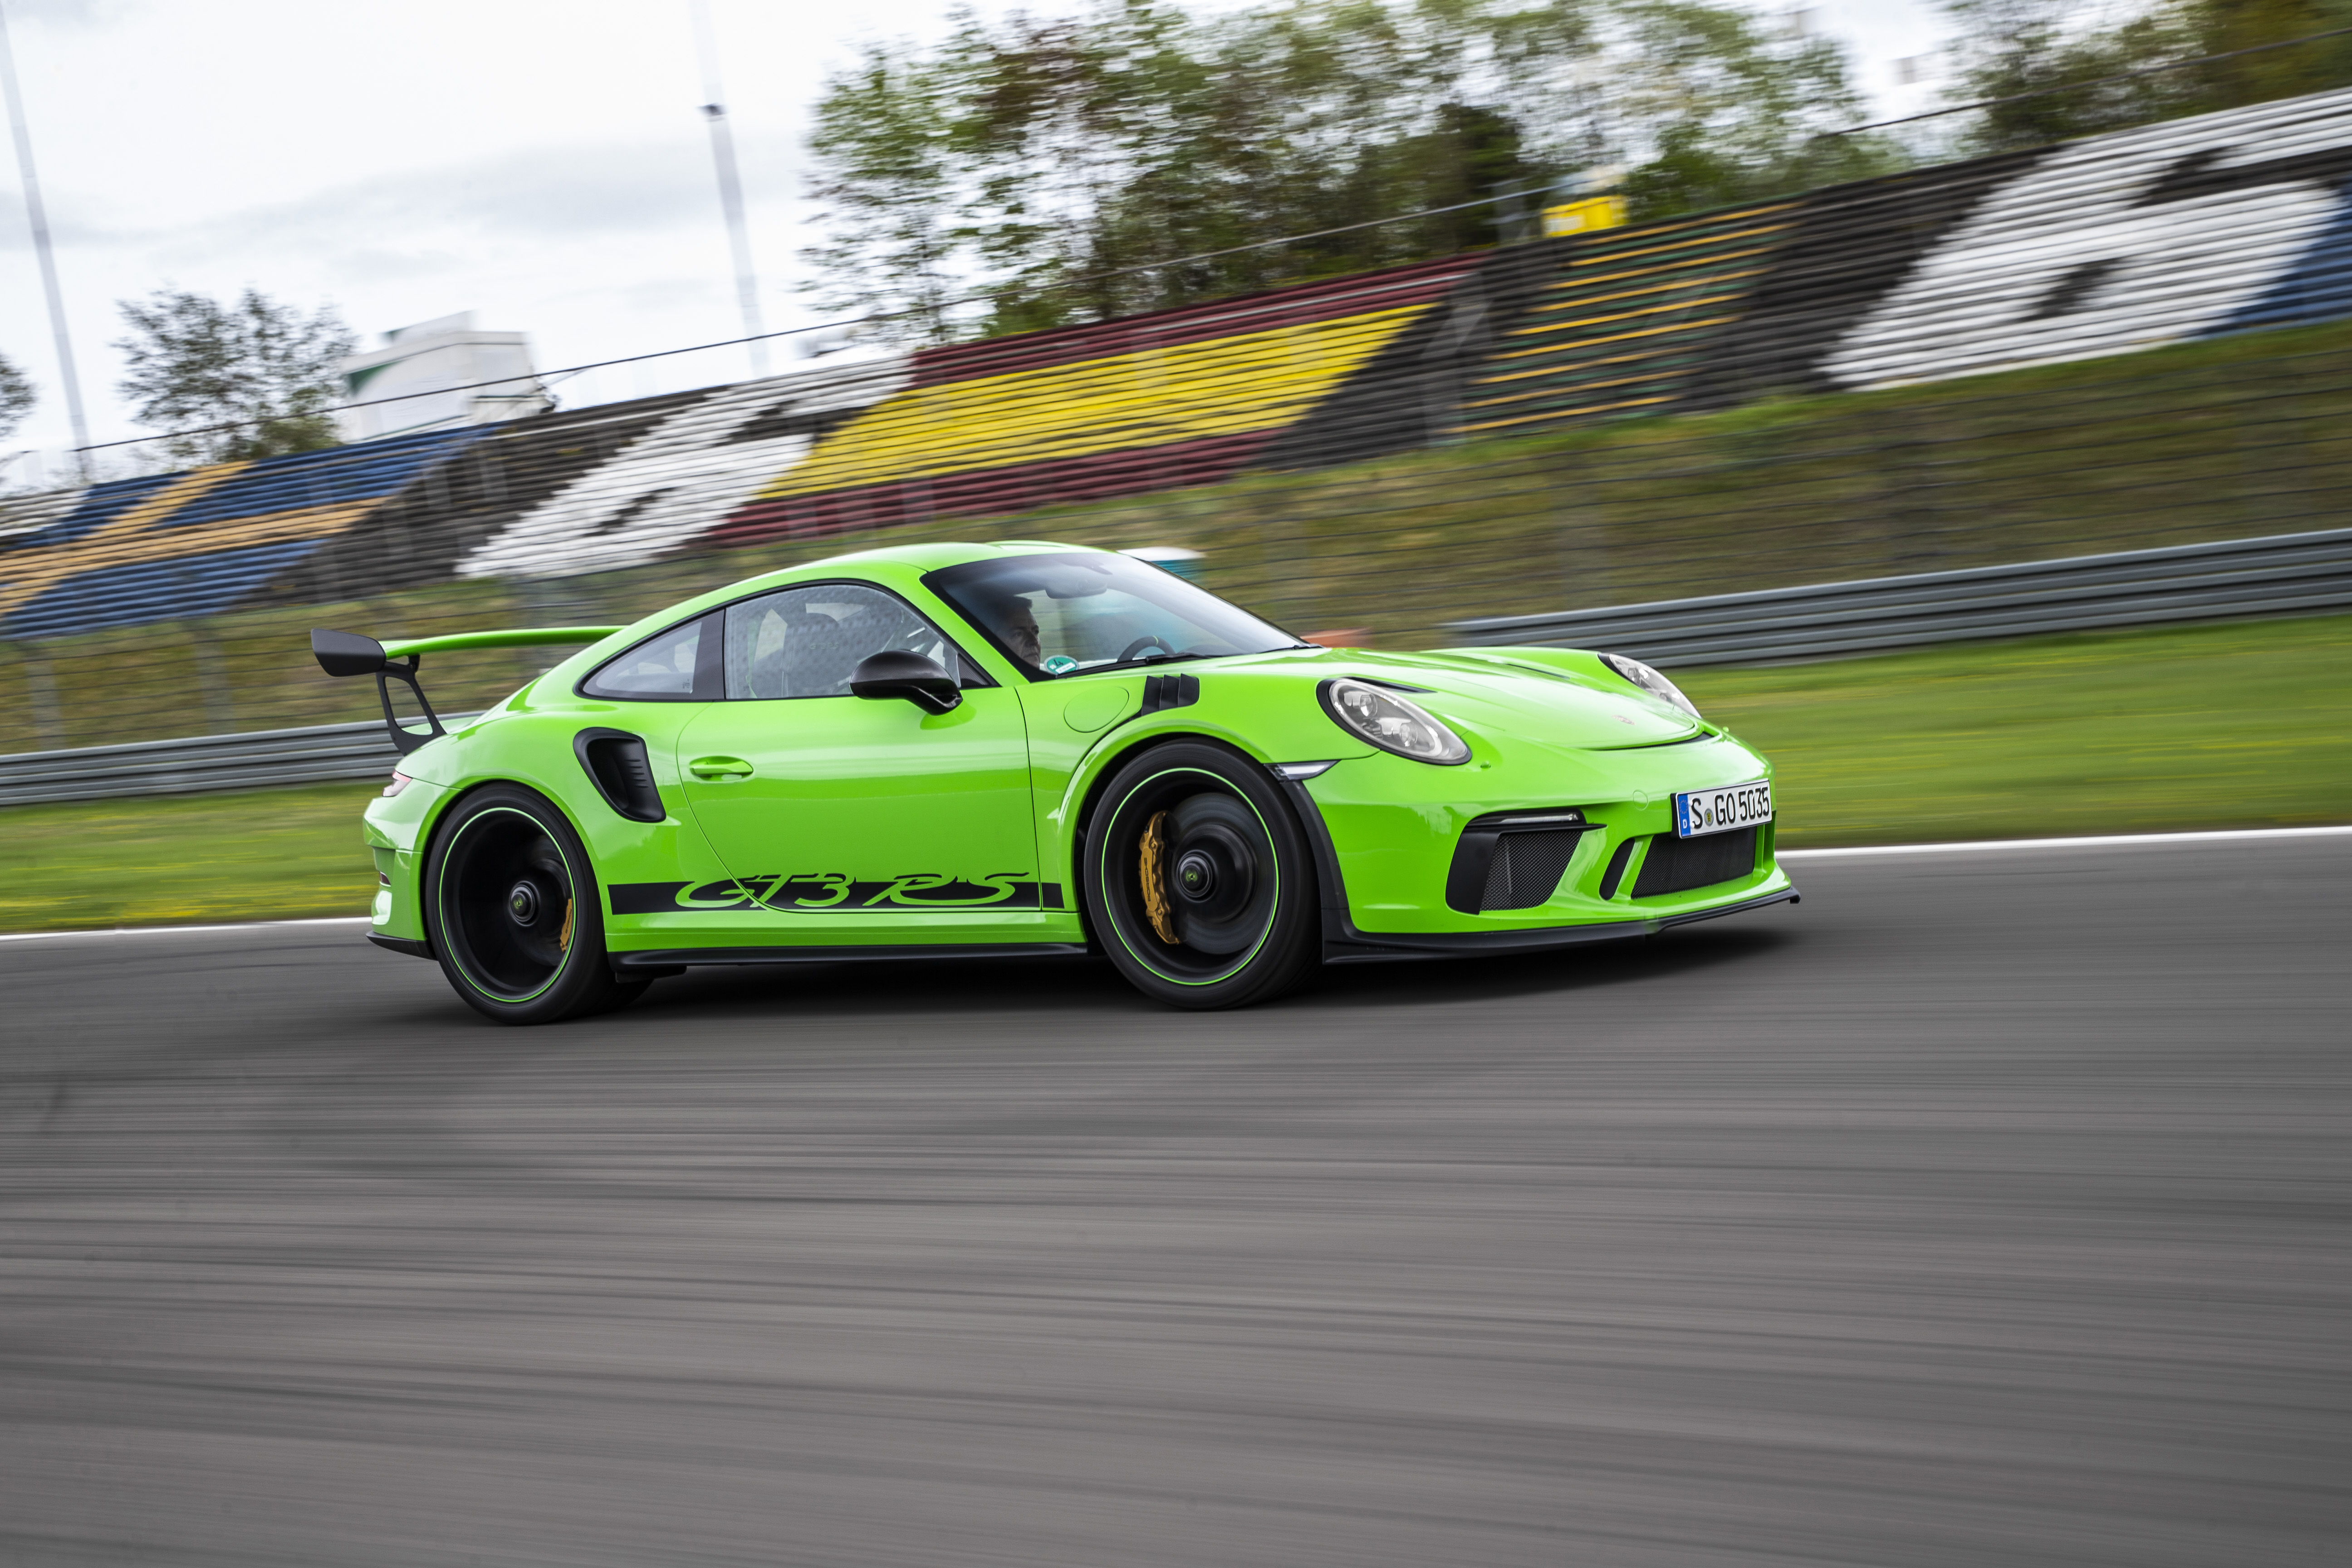 Bright green Porsche 911 GT3 RS (type 991.2) on track